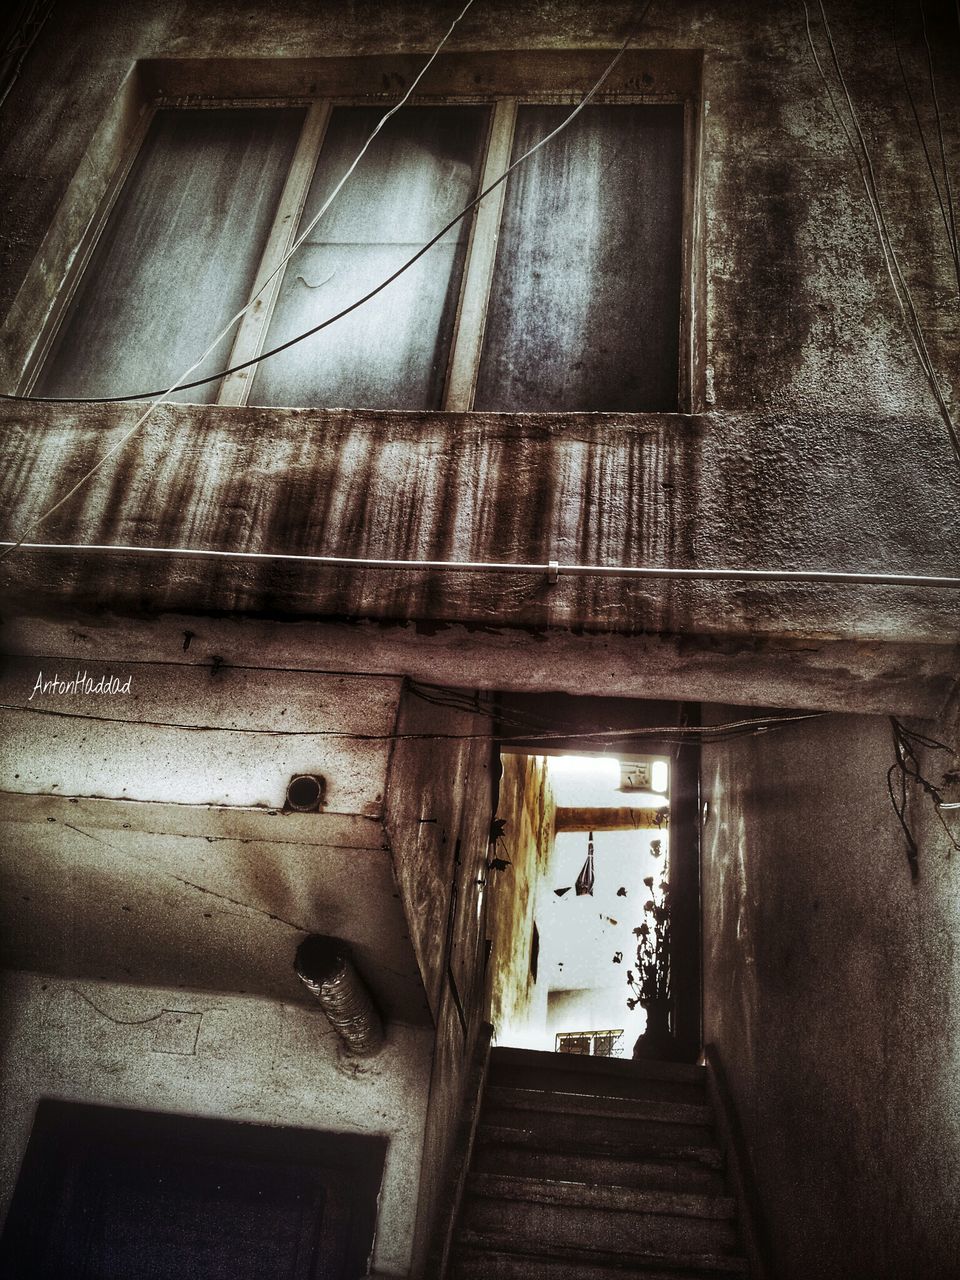 architecture, window, built structure, building exterior, abandoned, old, house, door, damaged, obsolete, run-down, weathered, building, deterioration, closed, bad condition, day, indoors, glass - material, wall - building feature